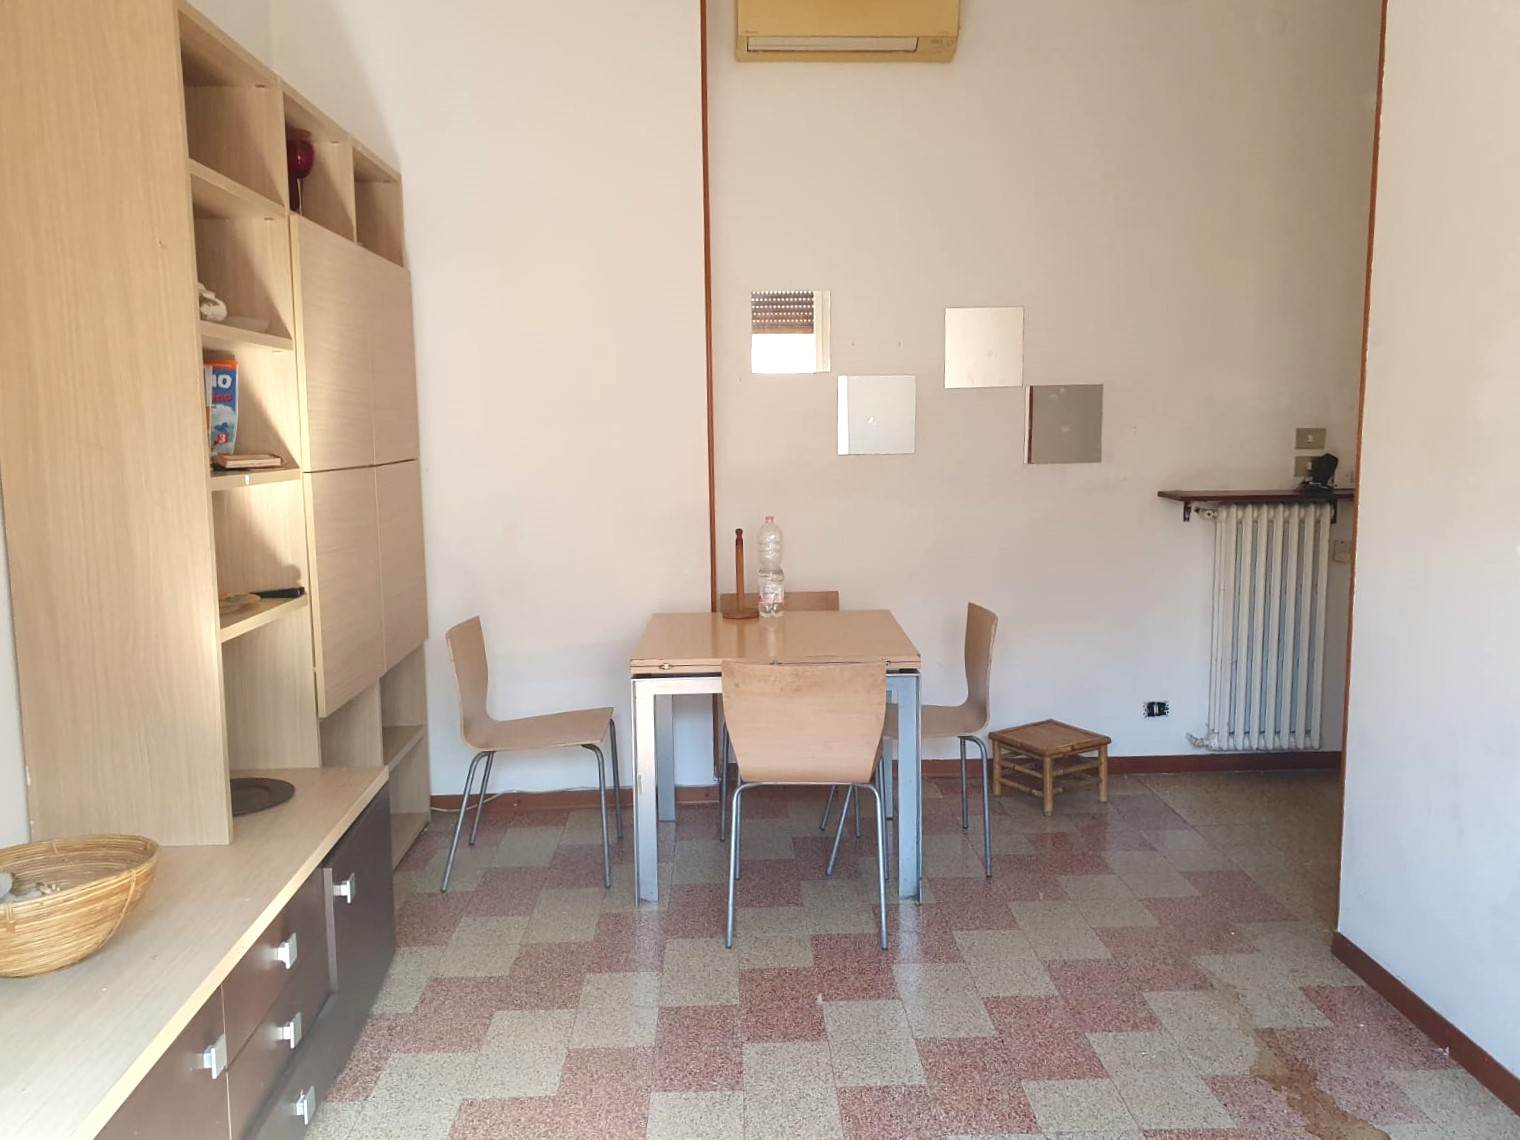 SESTO SAN GIOVANNI, Apartment for sale of 60 Sq. mt., Be restored, Heating Centralized, Energetic class: E, placed at 2° on 3, composed by: 2 Rooms, 